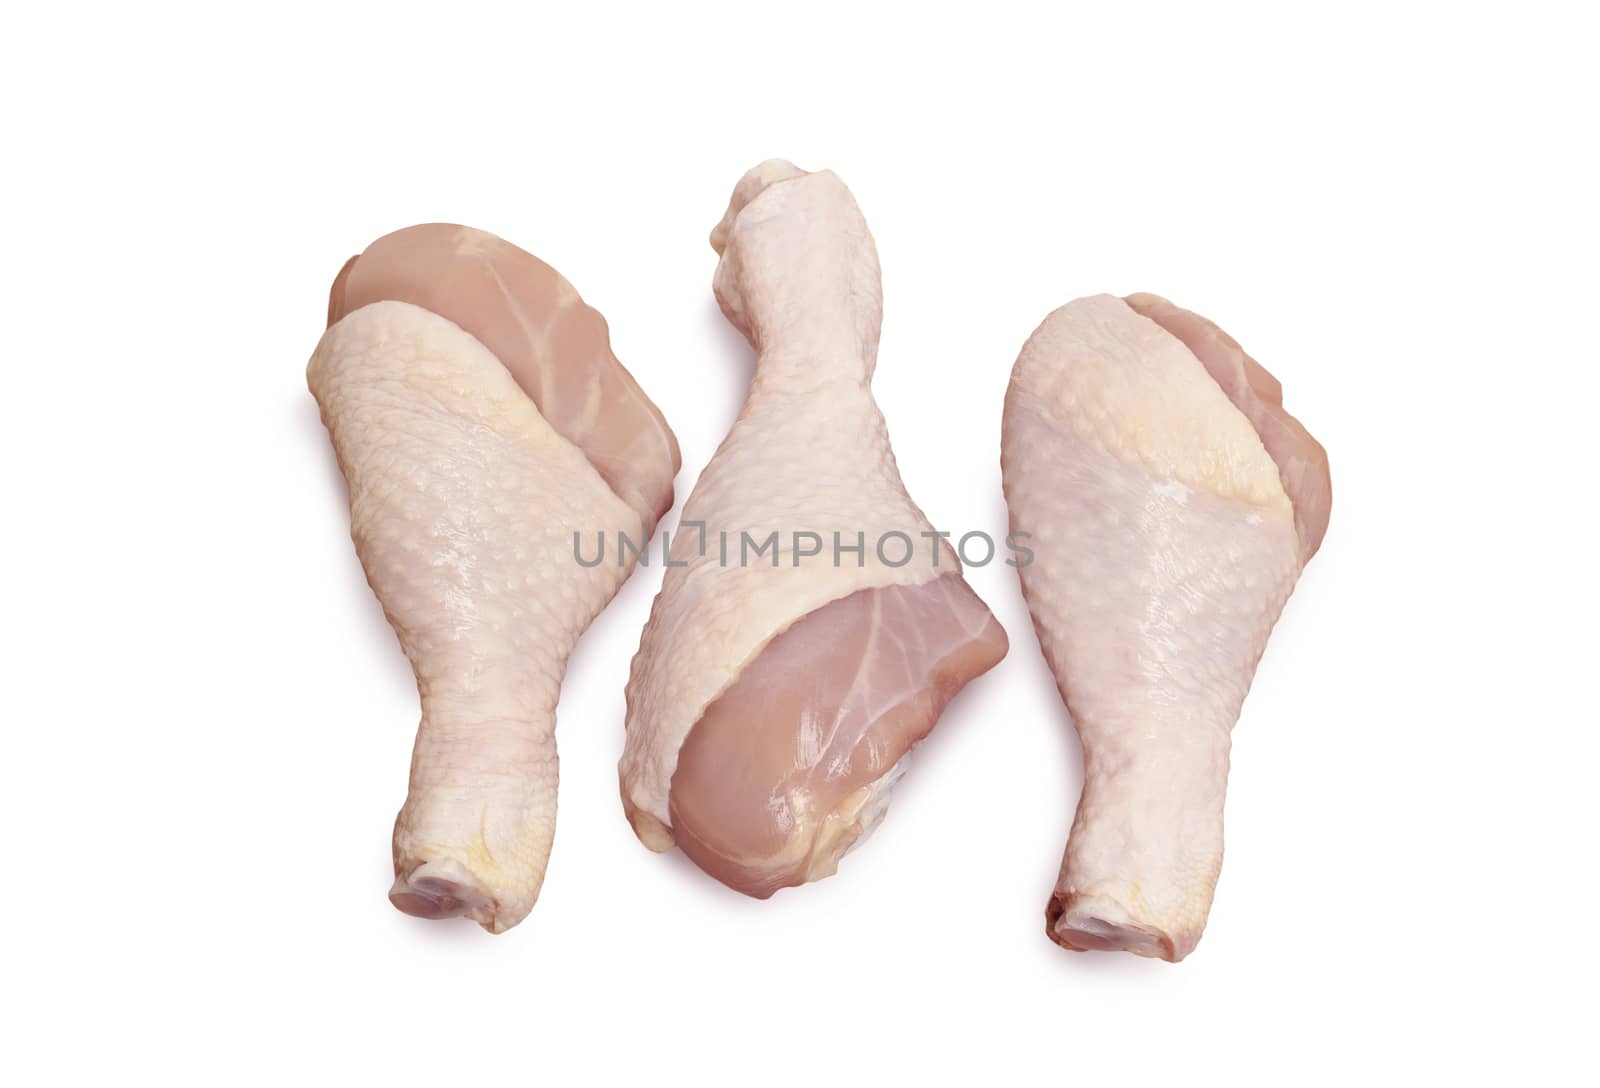 Raw Chicken meat isolated on white background by SlayCer